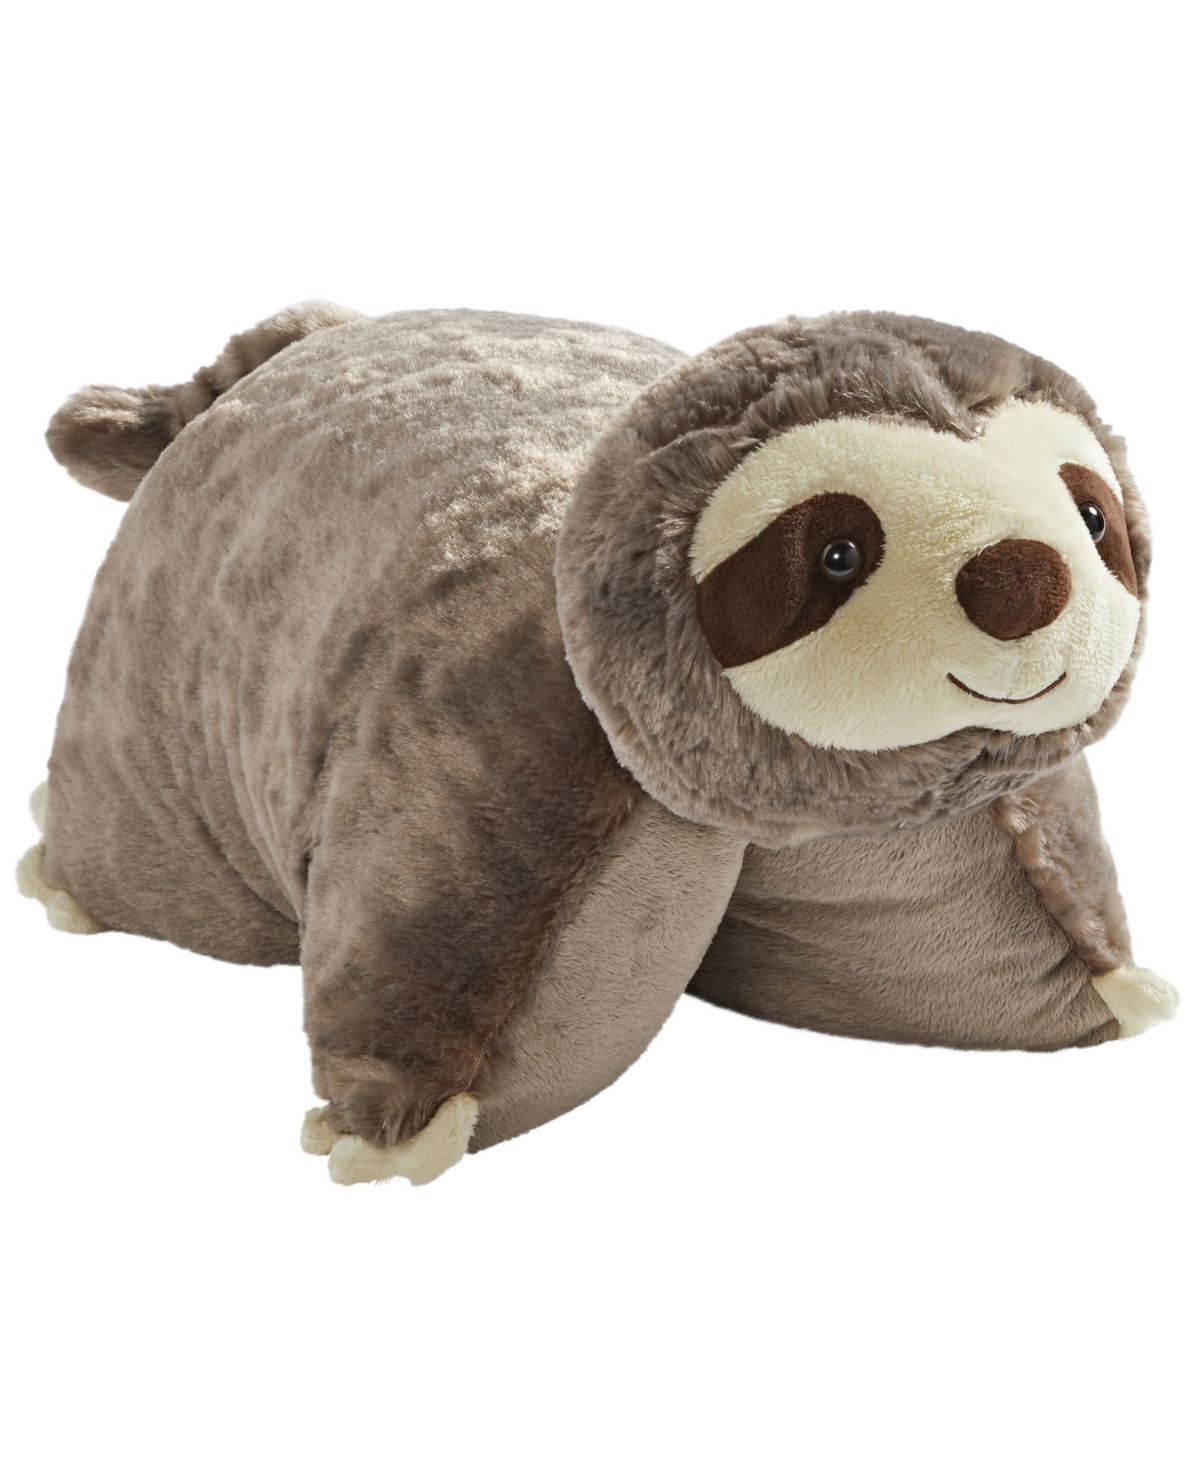 Pillow Pets Signature Sunny Sloth Stuffed Animal Plush Toy In Brown